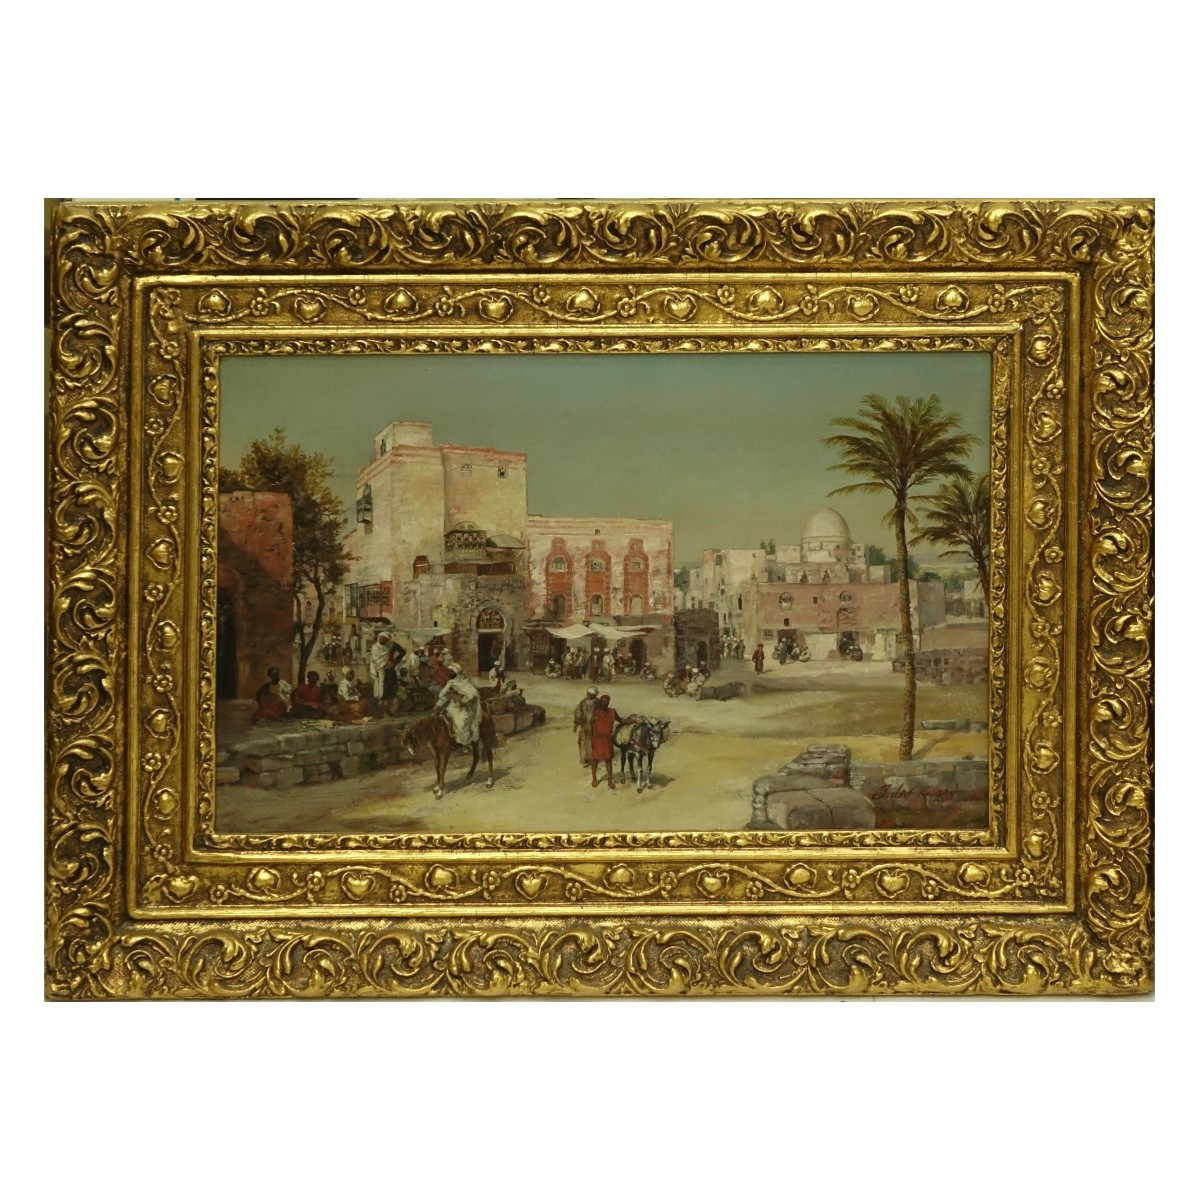 Jules Ribard, French 19/20th C.) Oil on Canvas